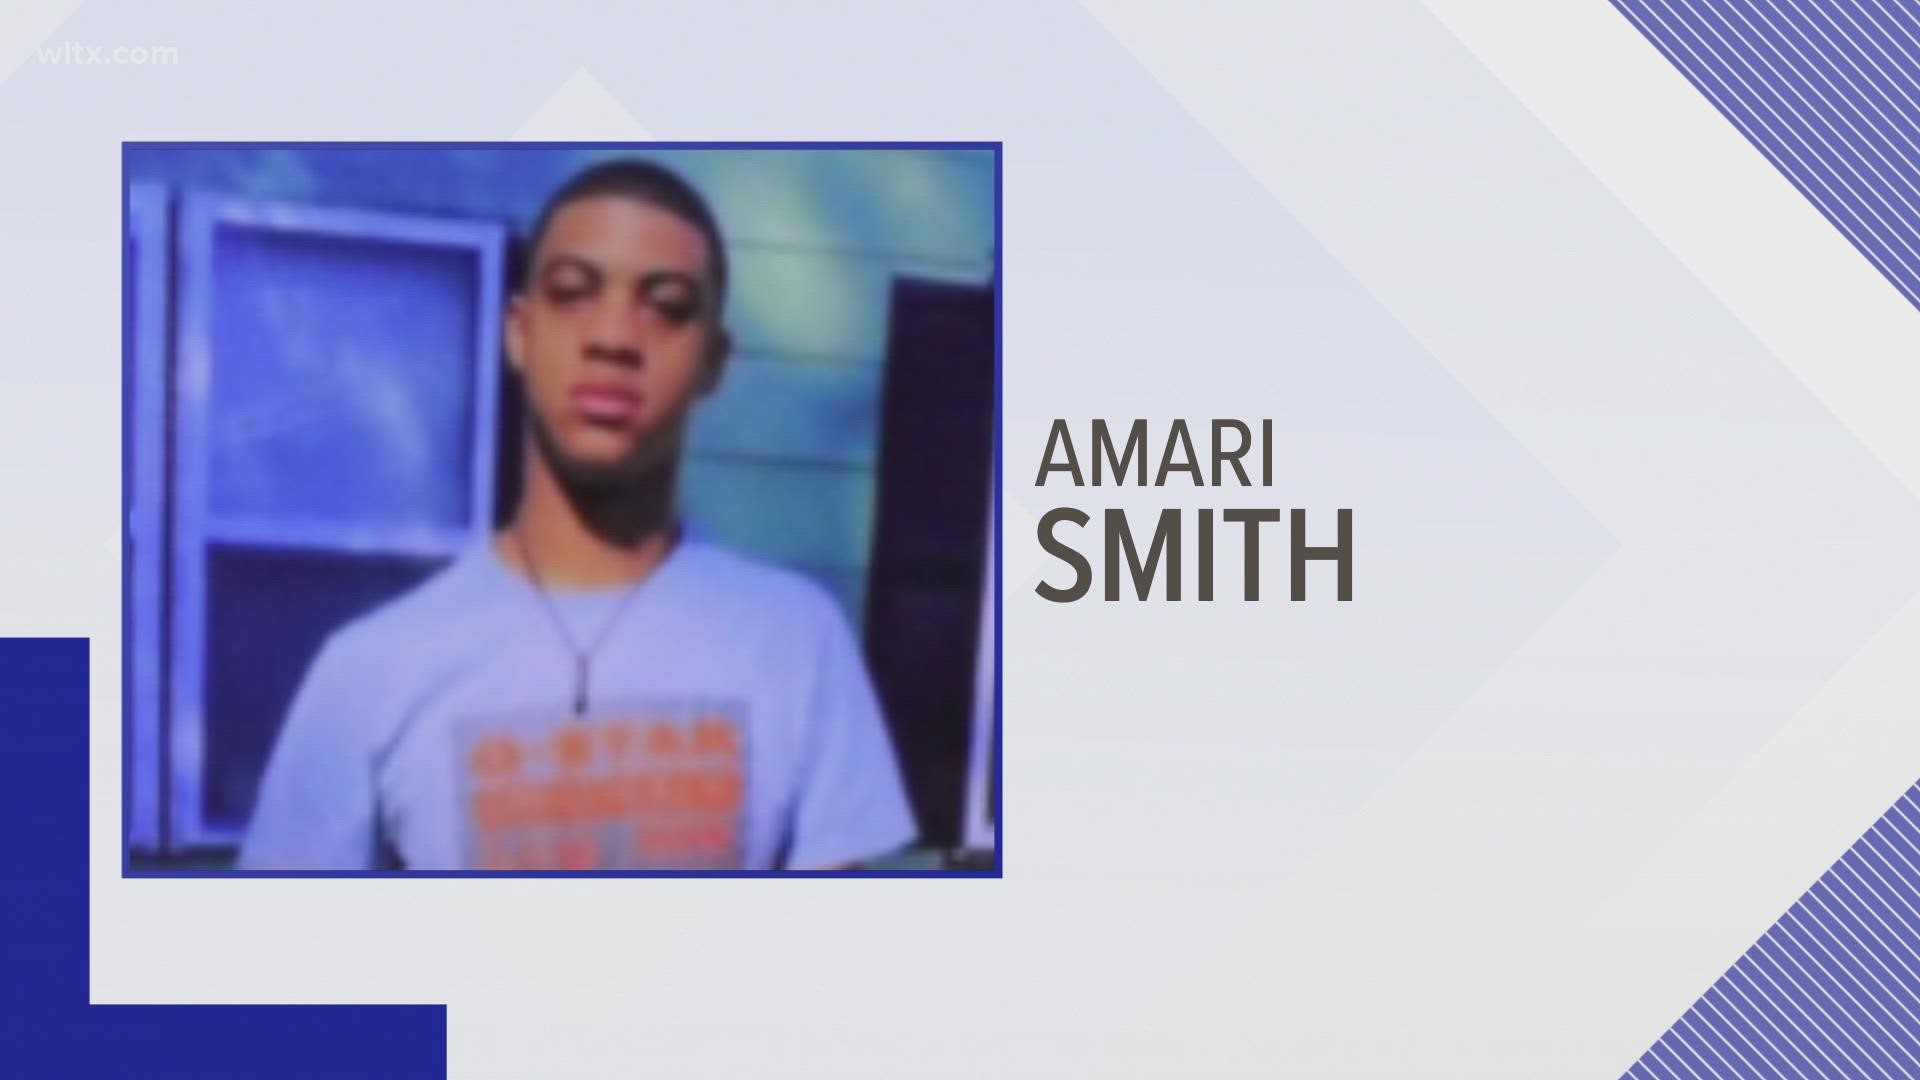 On Tuesday, Columbia Police and US Marshals announced they were offering a $10,000 reward for information that leads to the capture of Amari Sincere Jamal Smith.